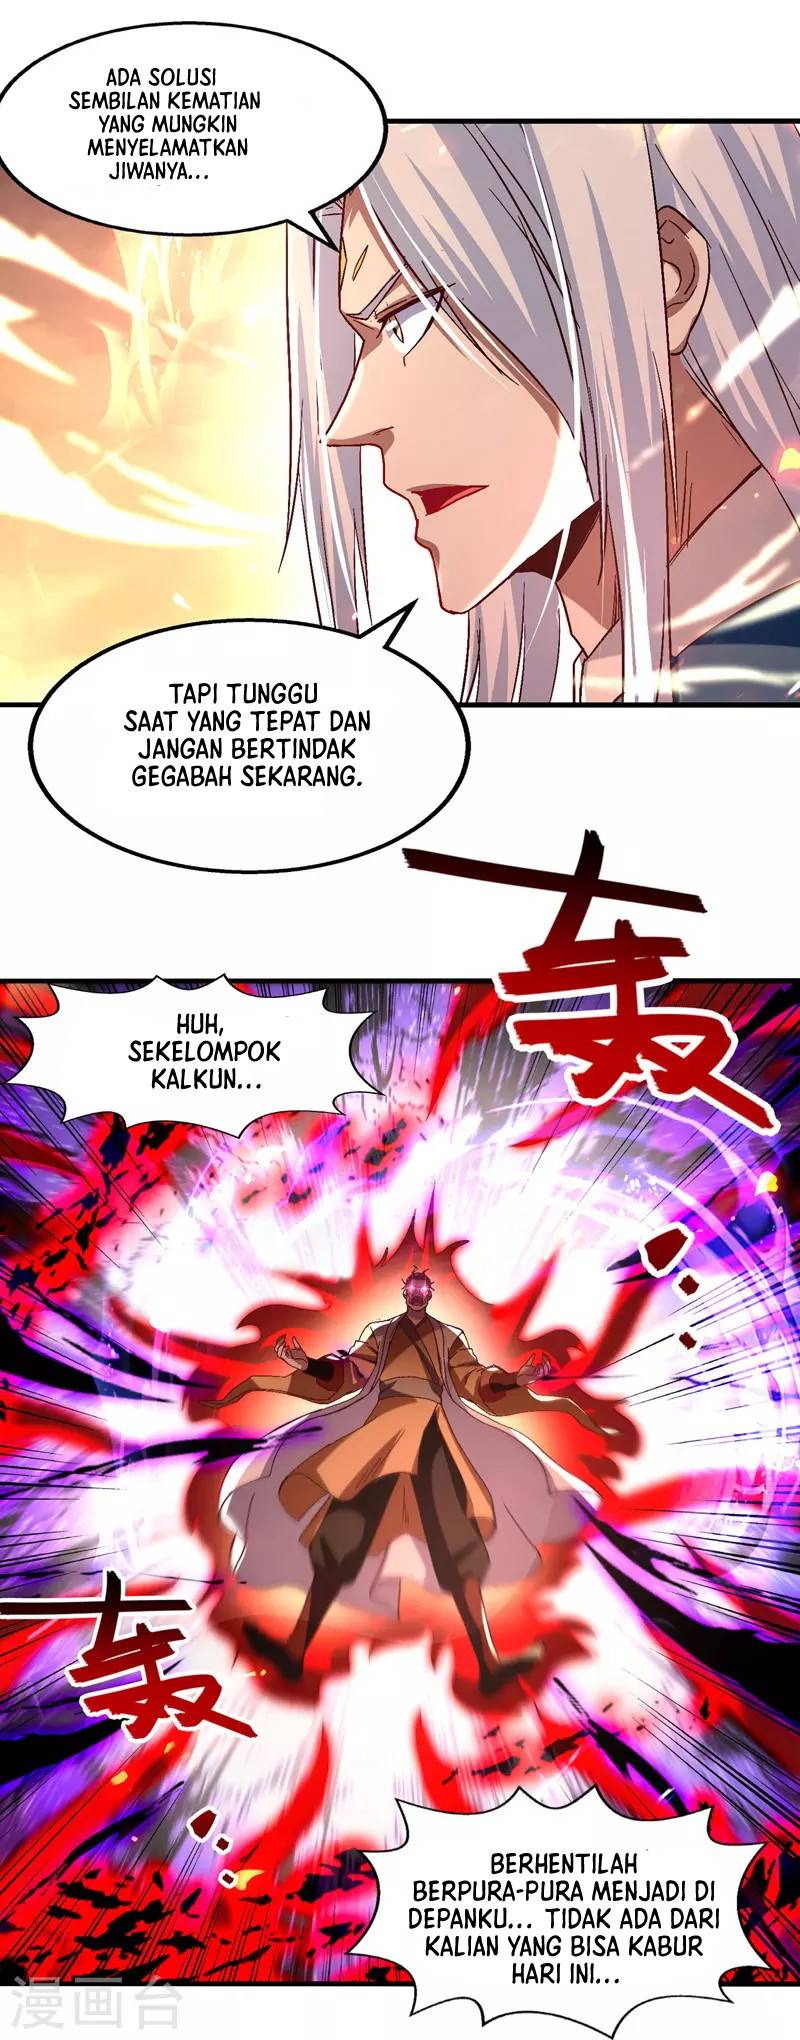 Against The Heaven Supreme (Heaven Guards) Chapter 75 - 161